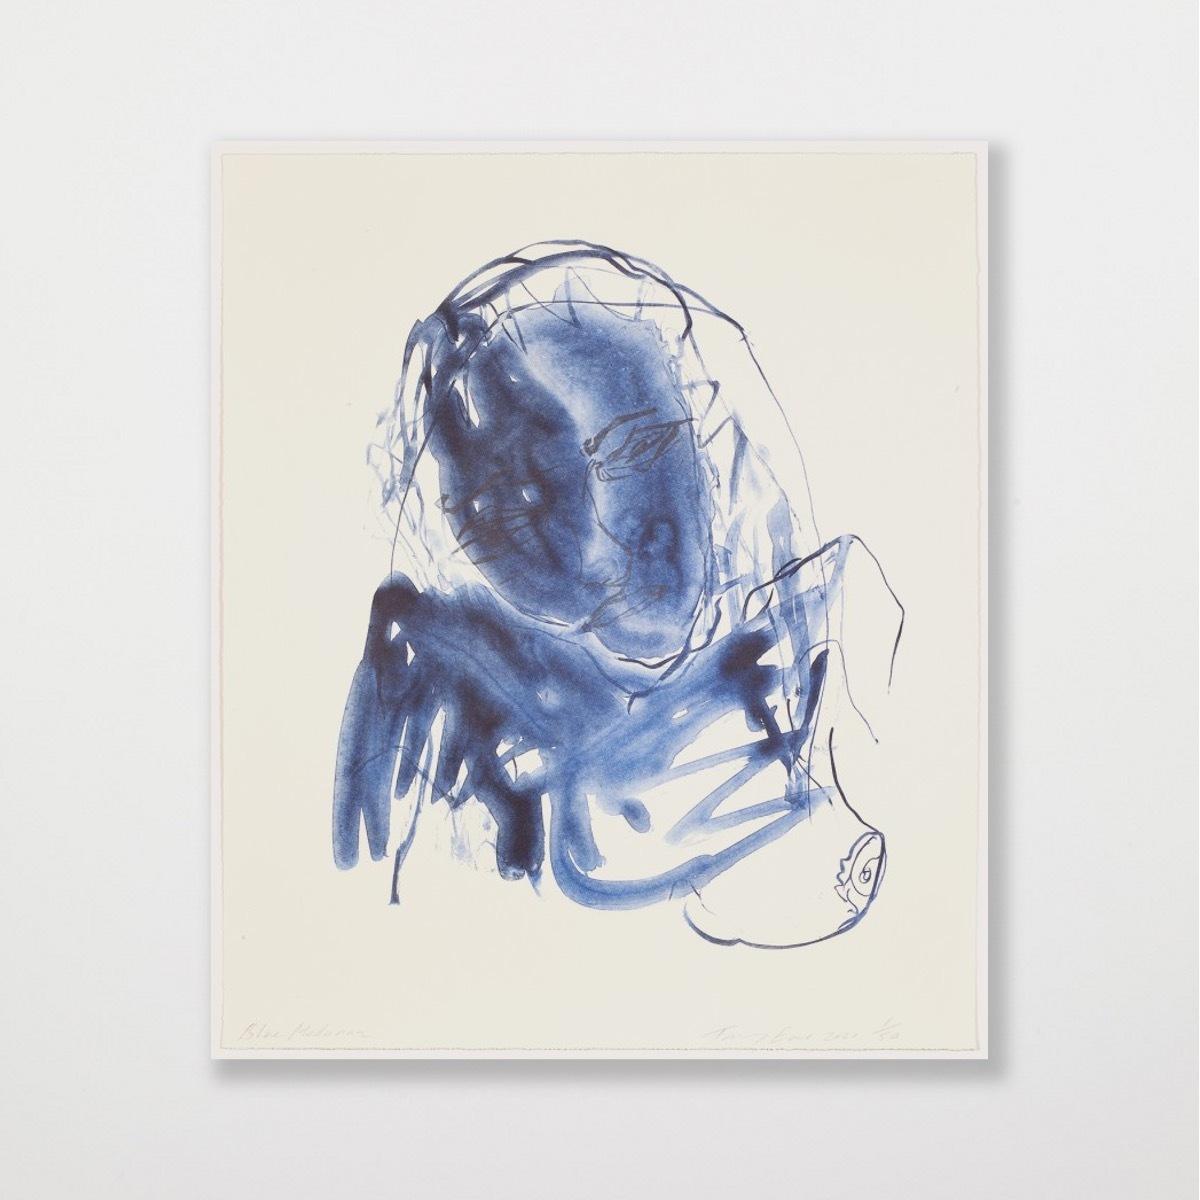 These Feelings Were True - Tracey Emin, Contemporary, Young British Artiststs, Lithograph, Blue, Portrait, Limited Edition
2 colour lithographs on Somerset Velvet Warm White 400gsm (Poprtfolio of 8)
Edition 25 of 50, the full Set is offered in